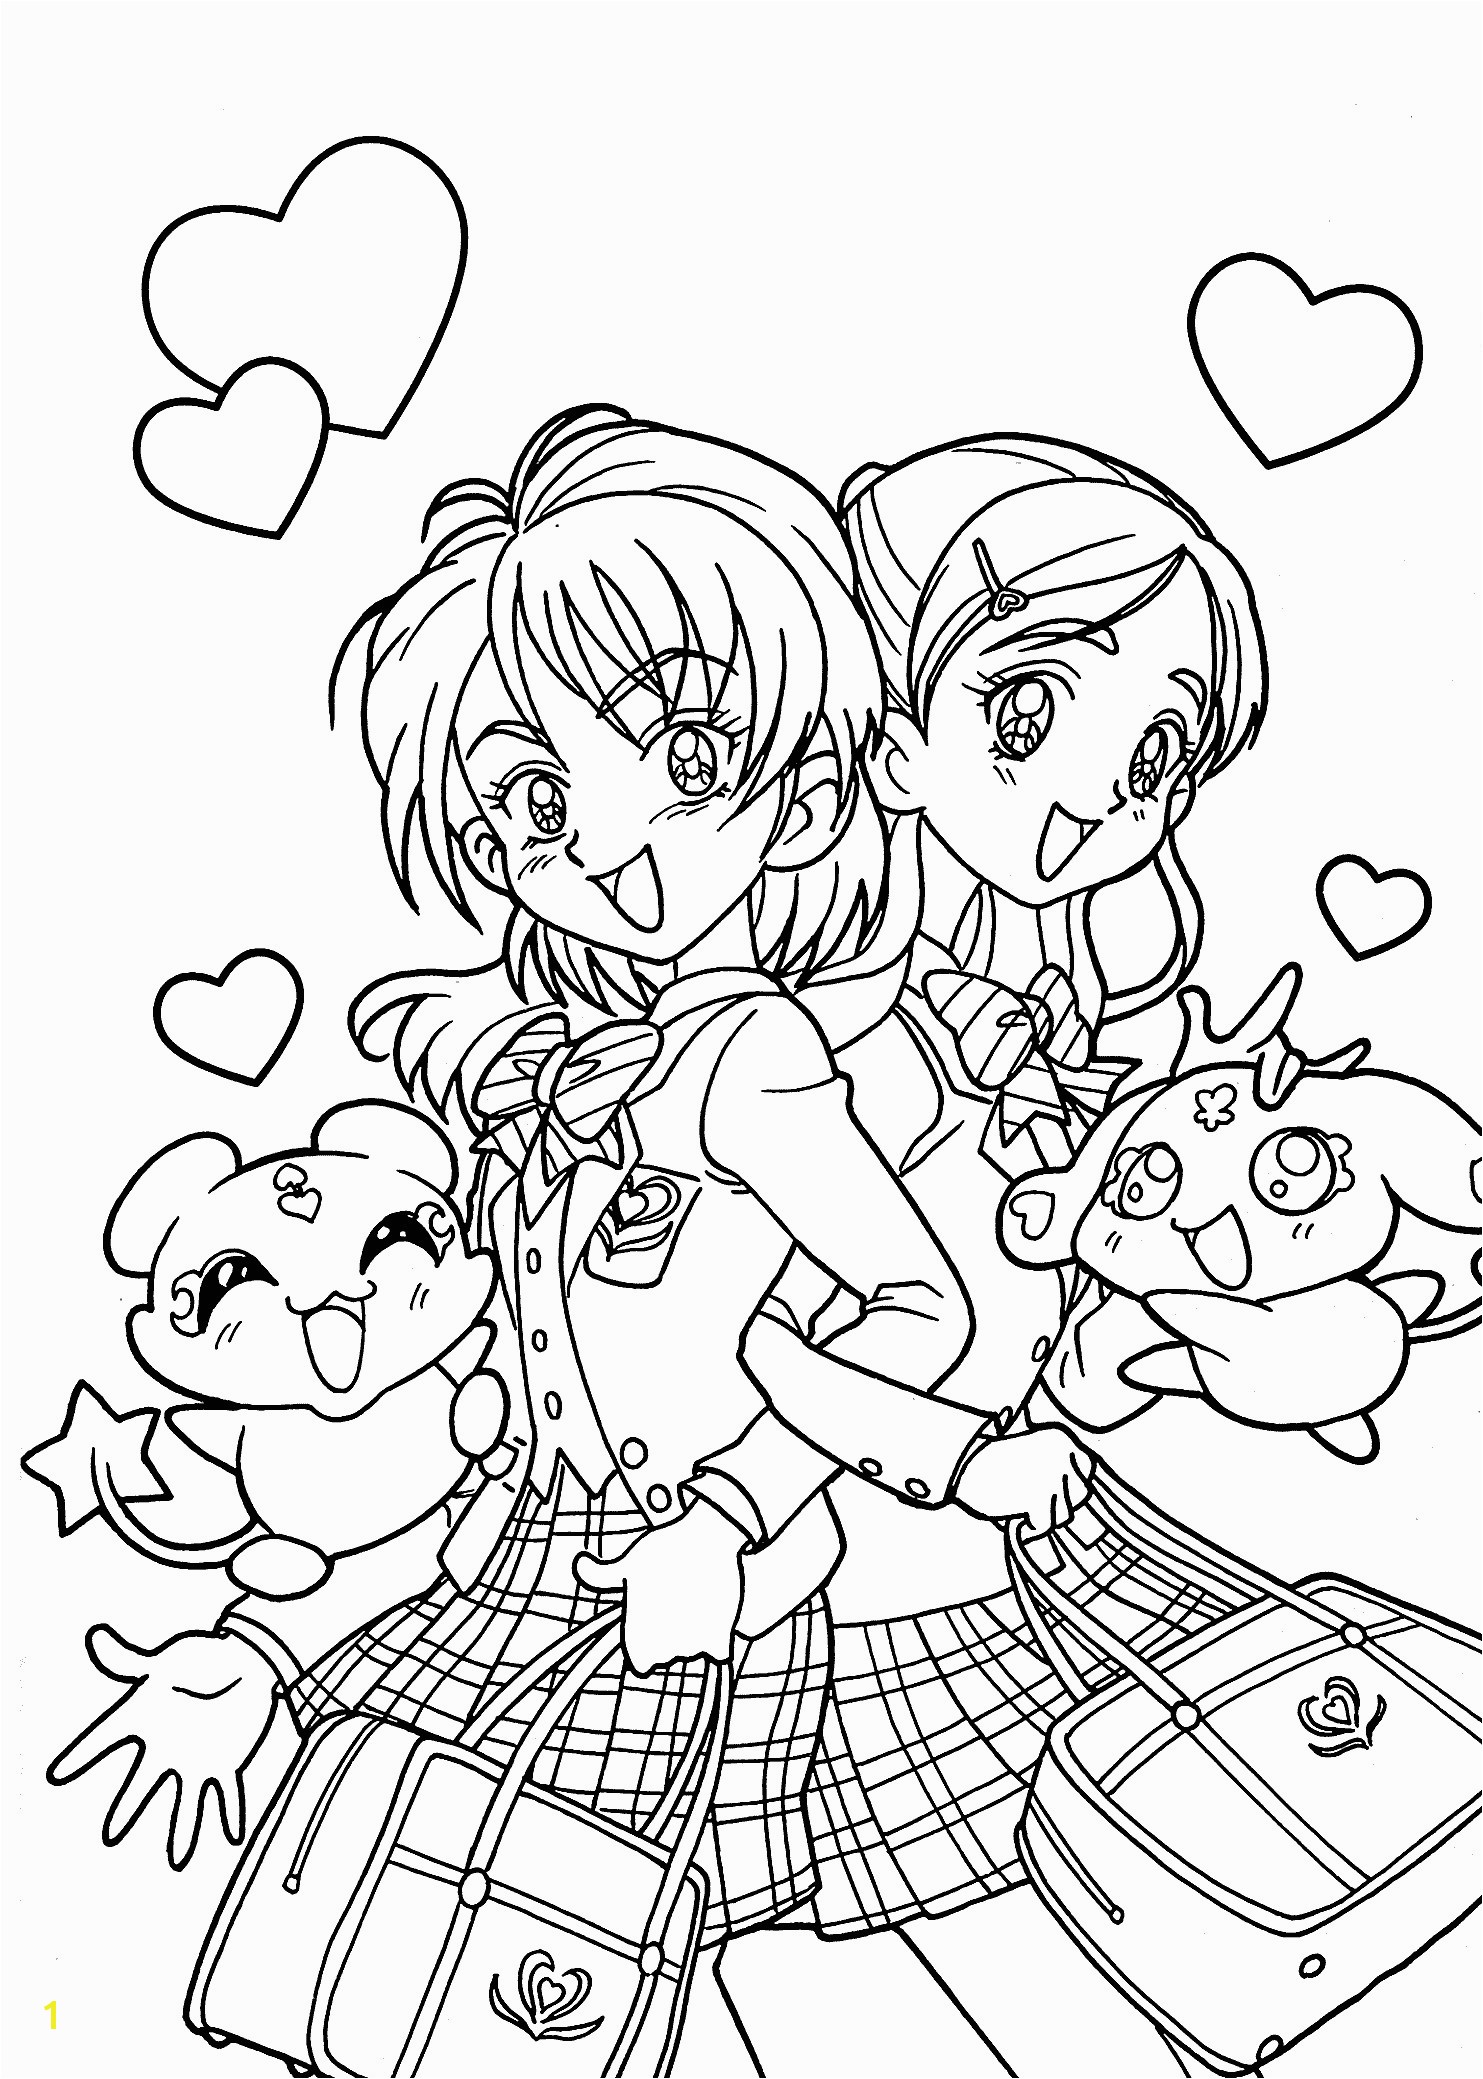 Cute Anime Chibi Girl Coloring Pages Beautiful Printable Coloring Pages for Girls Lovely Printable Cds 0d – Fun